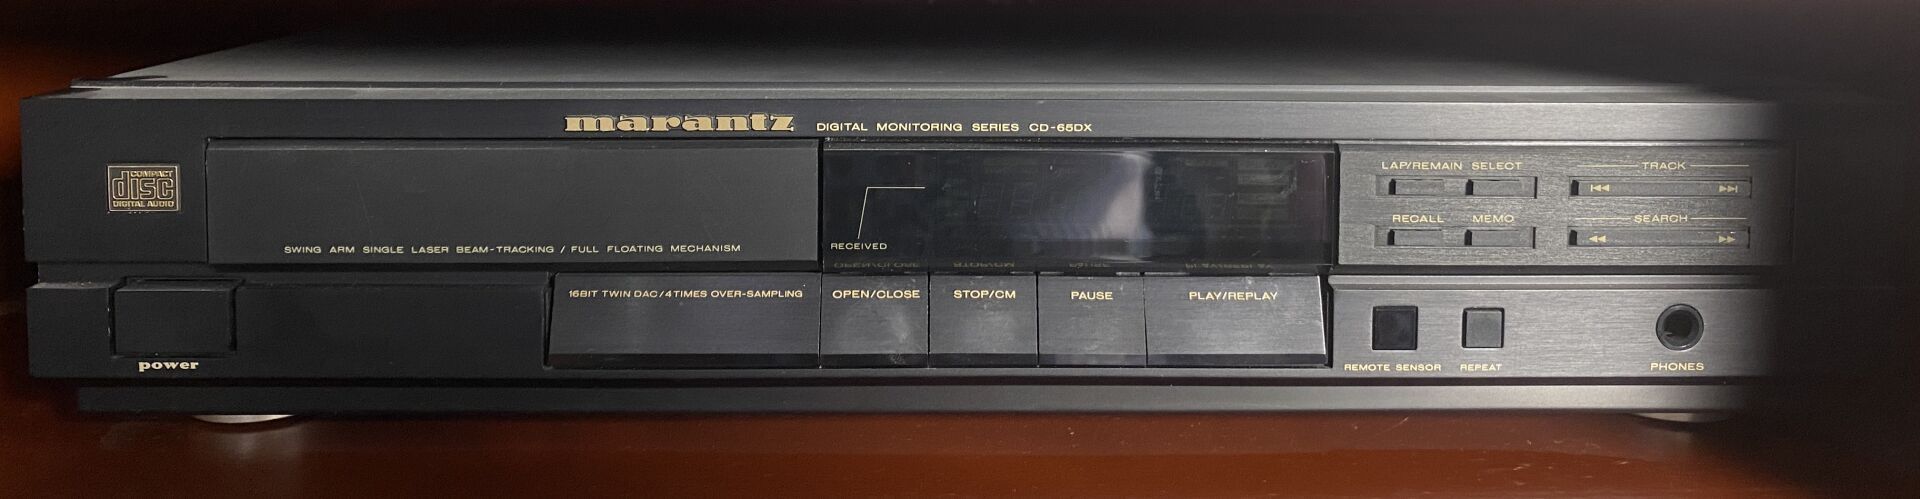 Null MARANTZ
65DX CD player

Not tested 
ATTENTION: Pick-up of this lot will be &hellip;